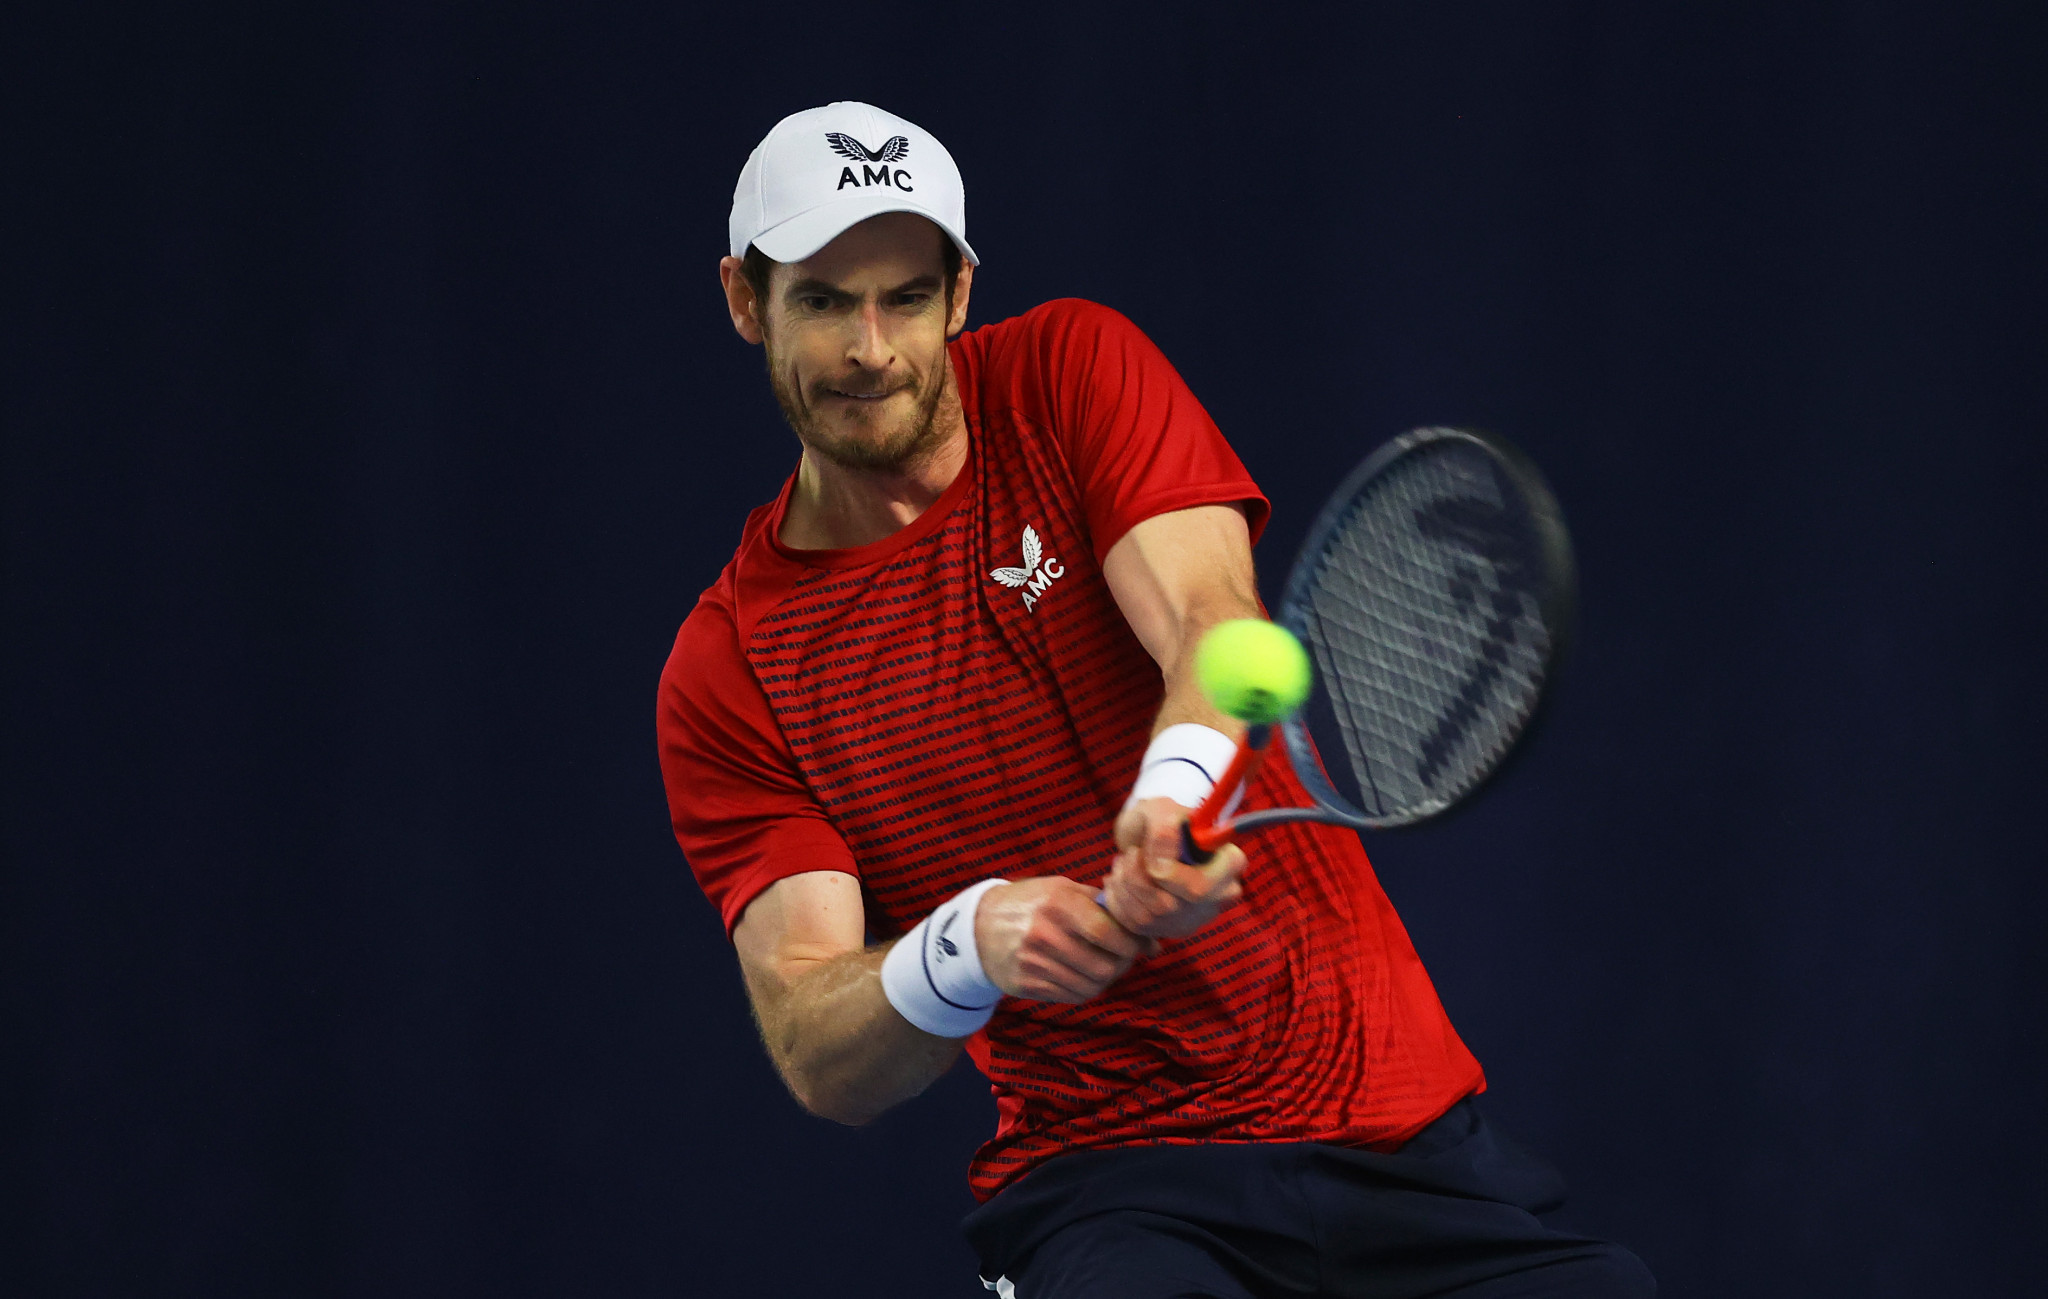 Murray ruled out of Australian Open and Badosa tests positive for COVID-19